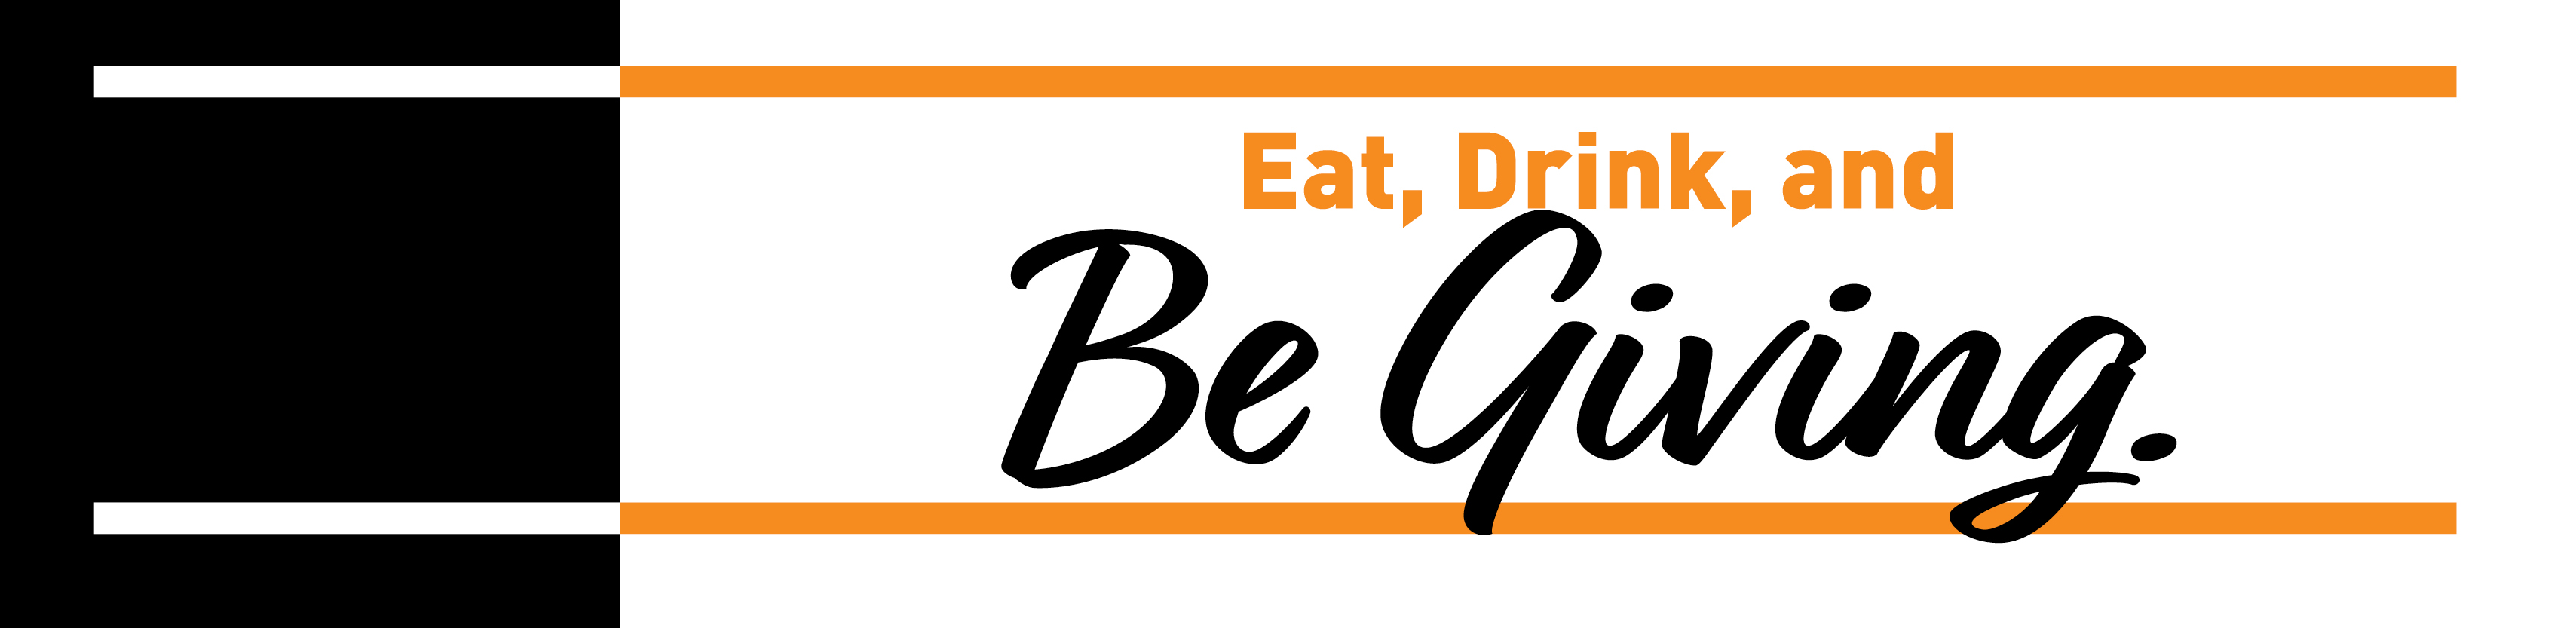 Eat Drink and Be Giving